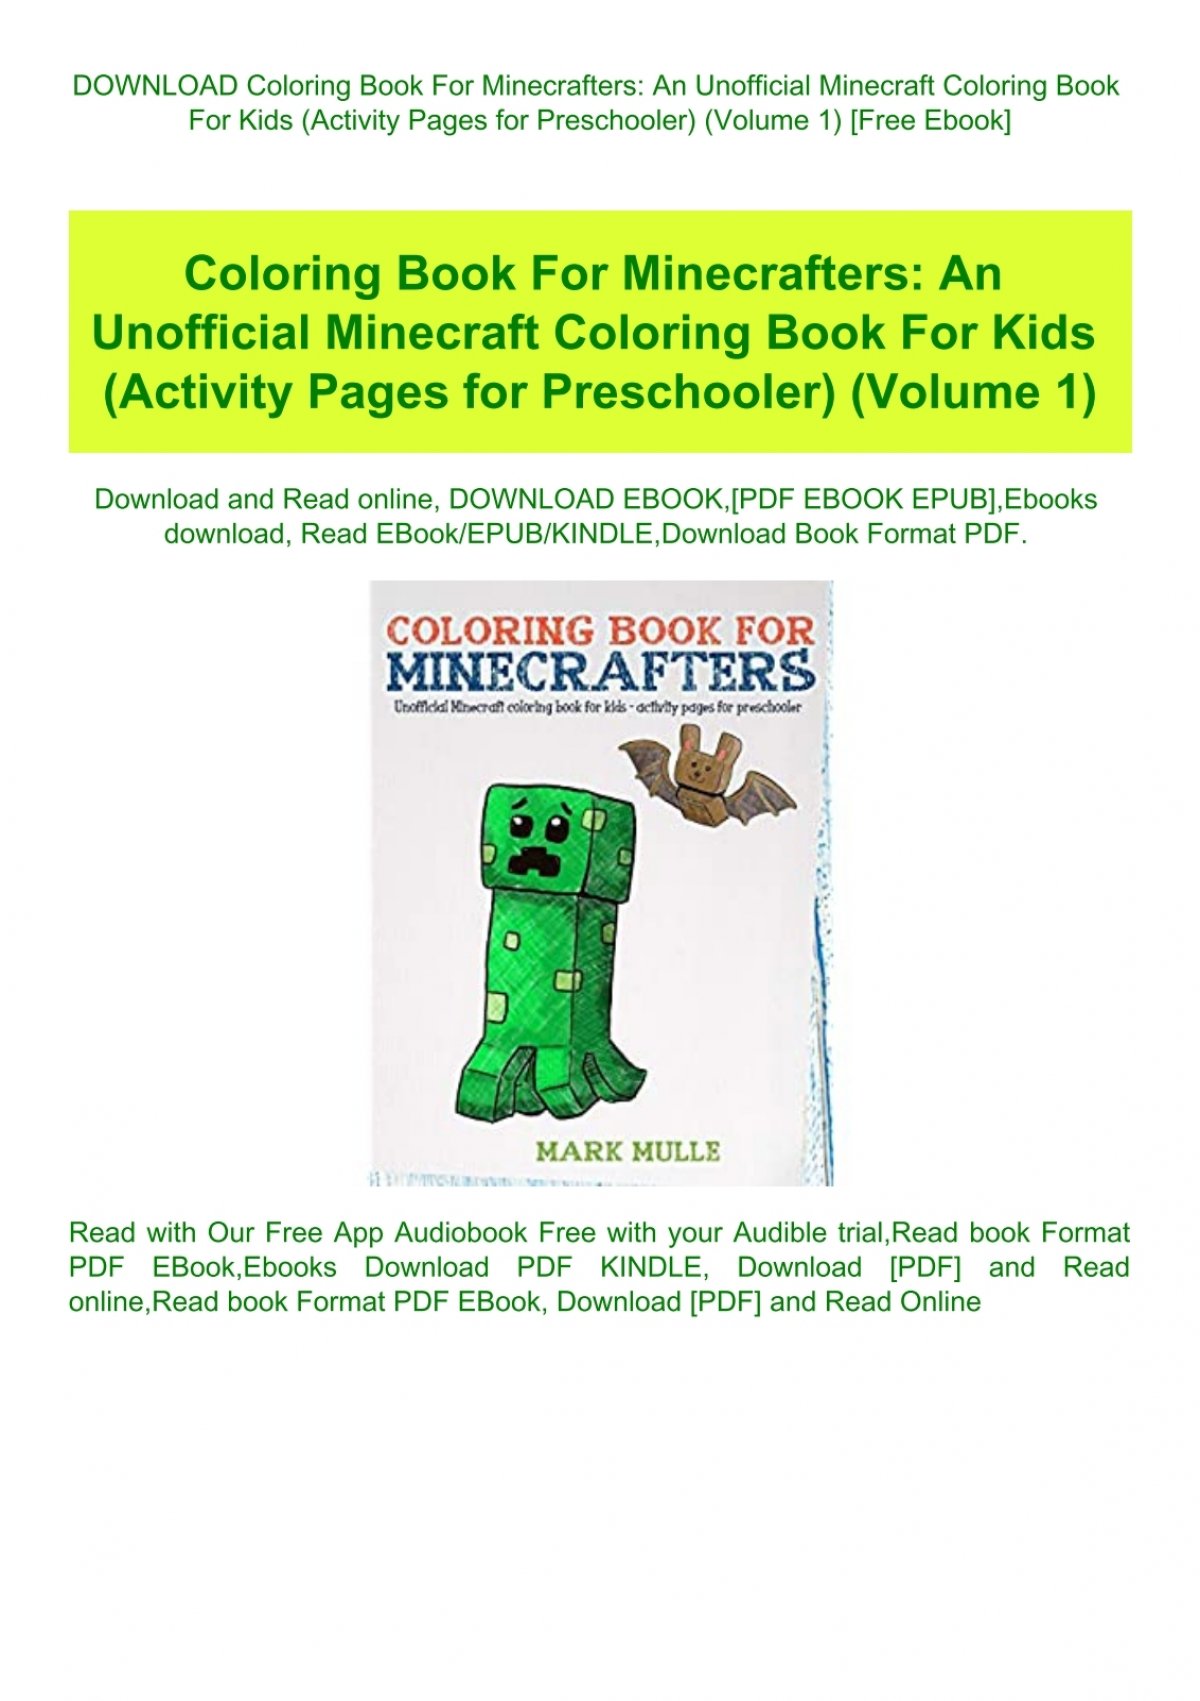 Download Download Coloring Book For Minecrafters An Unofficial Minecraft Coloring Book For Kids Activity Pages For Preschooler Volume 1 Free Ebook